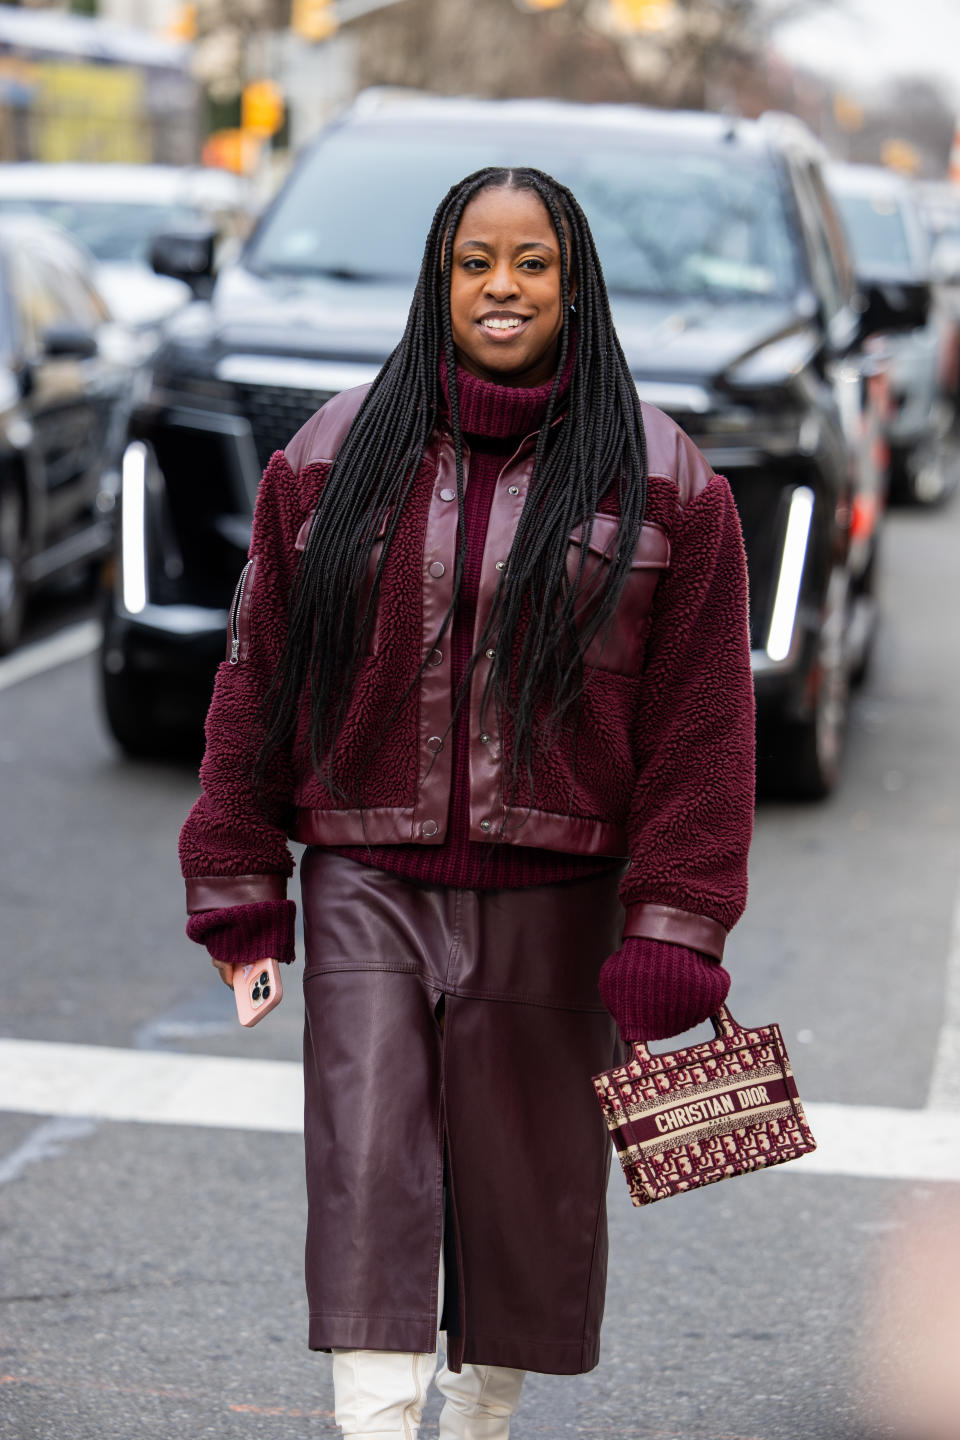 A woman at fashion week in a burgundy jacket and leather shorts